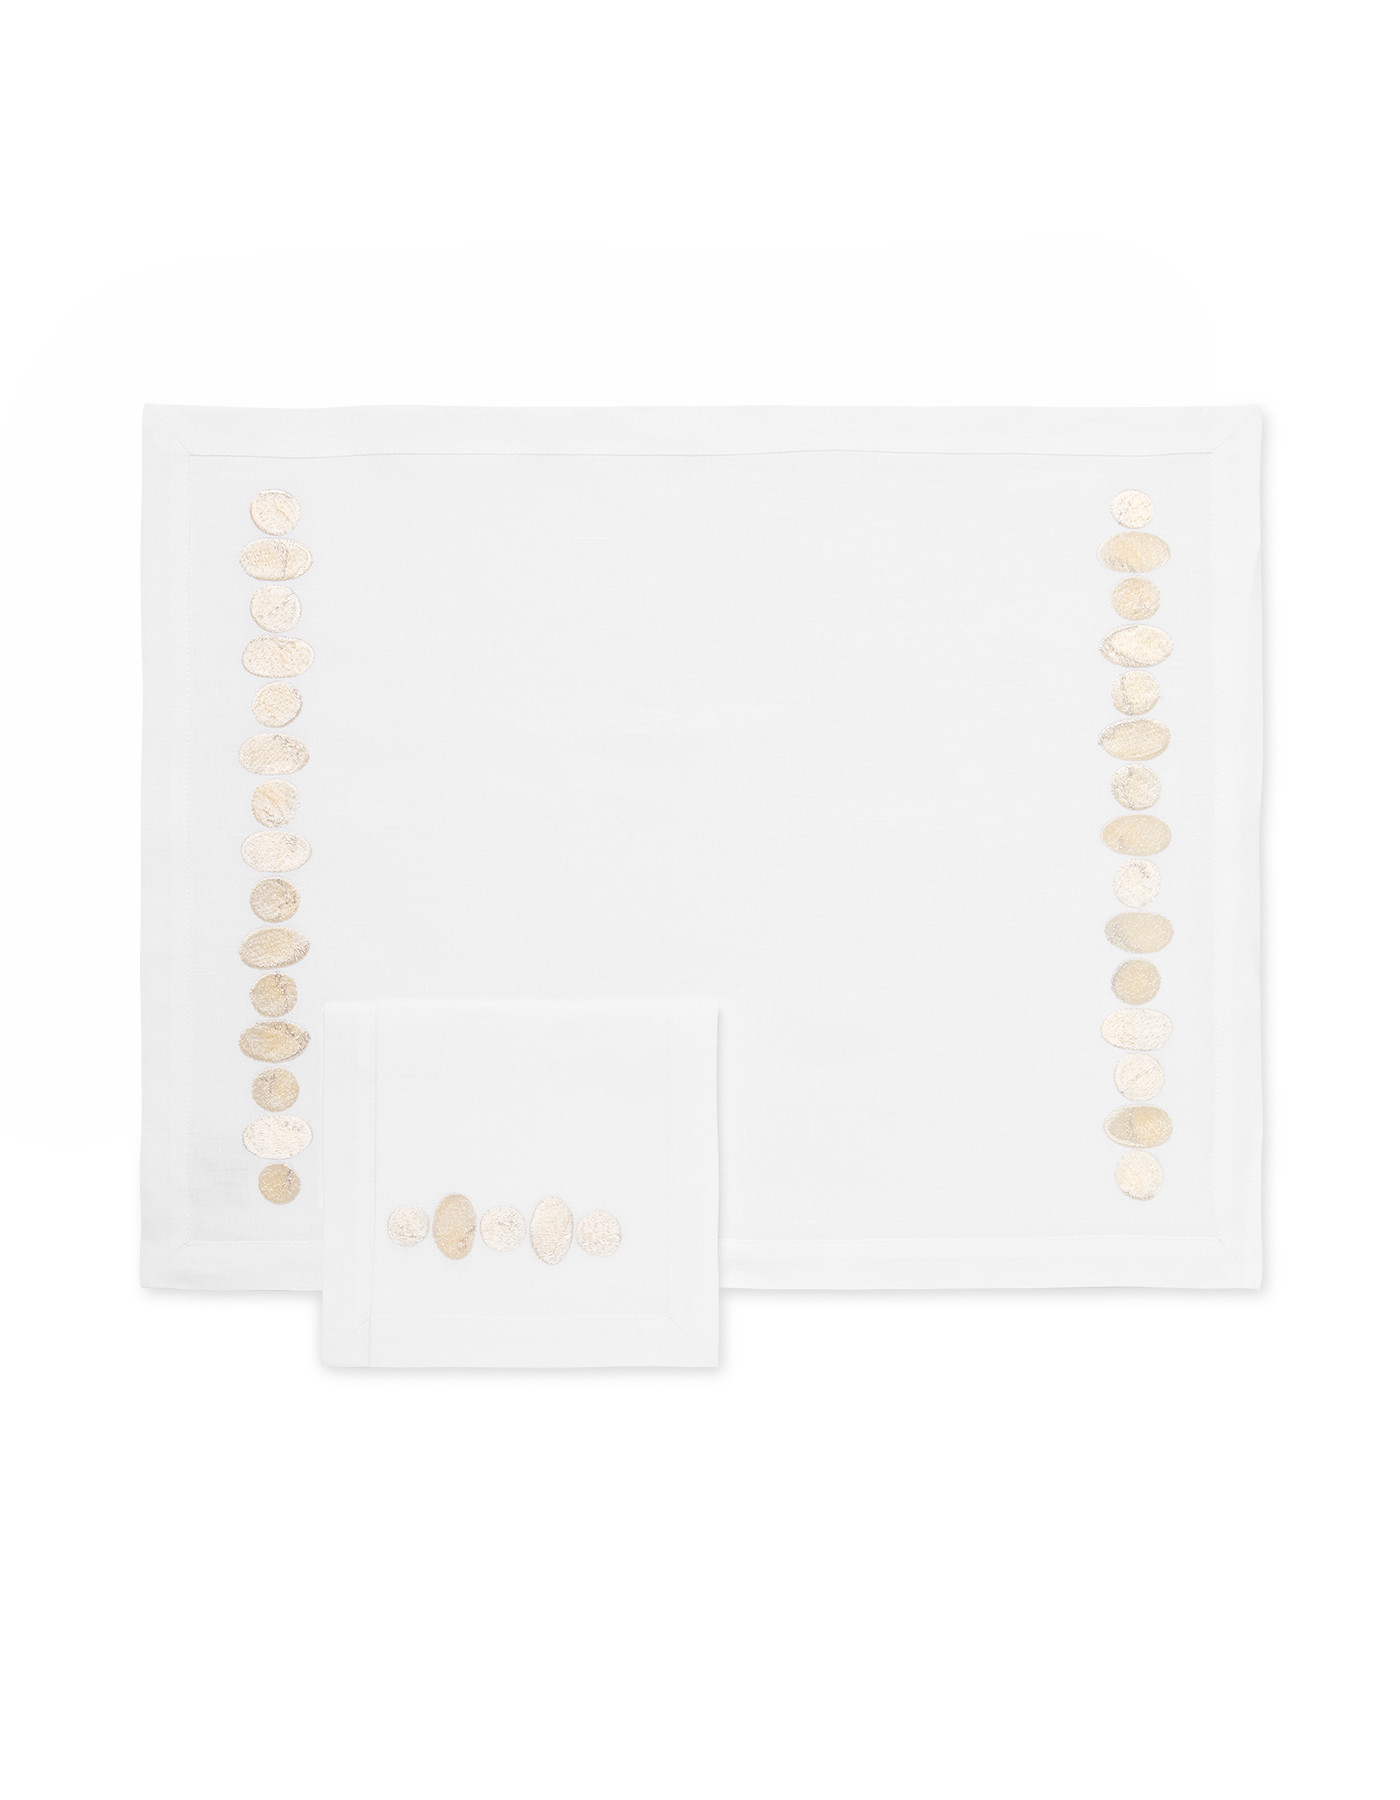 "Galets" (stones) place mat and napkin